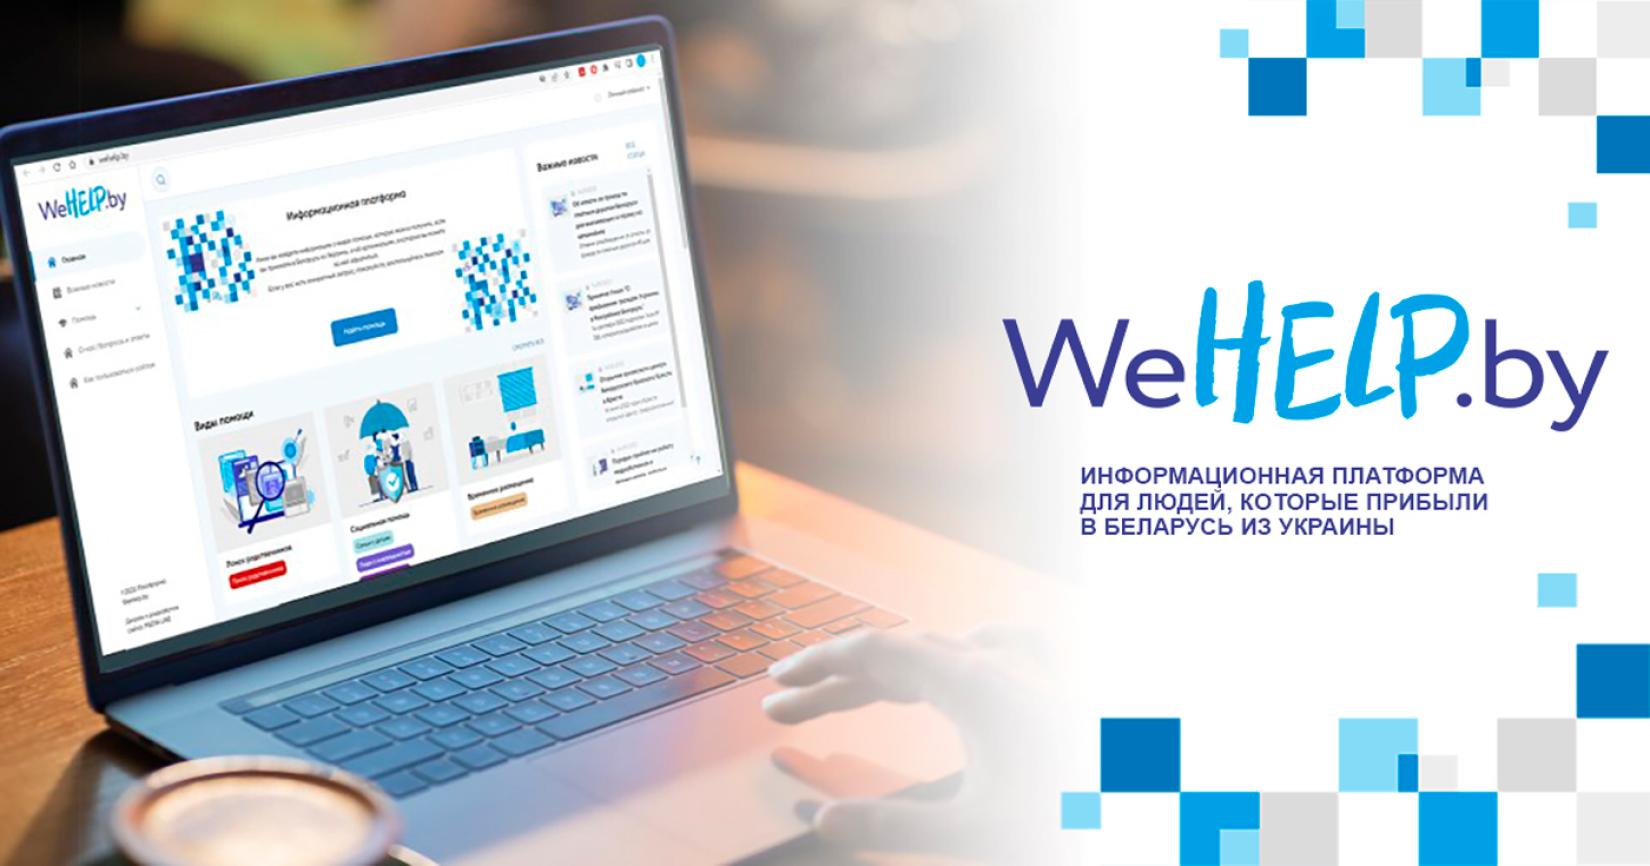 UN agencies developed the WeHelp online platform functioning as  information portal for refugees from Ukraine